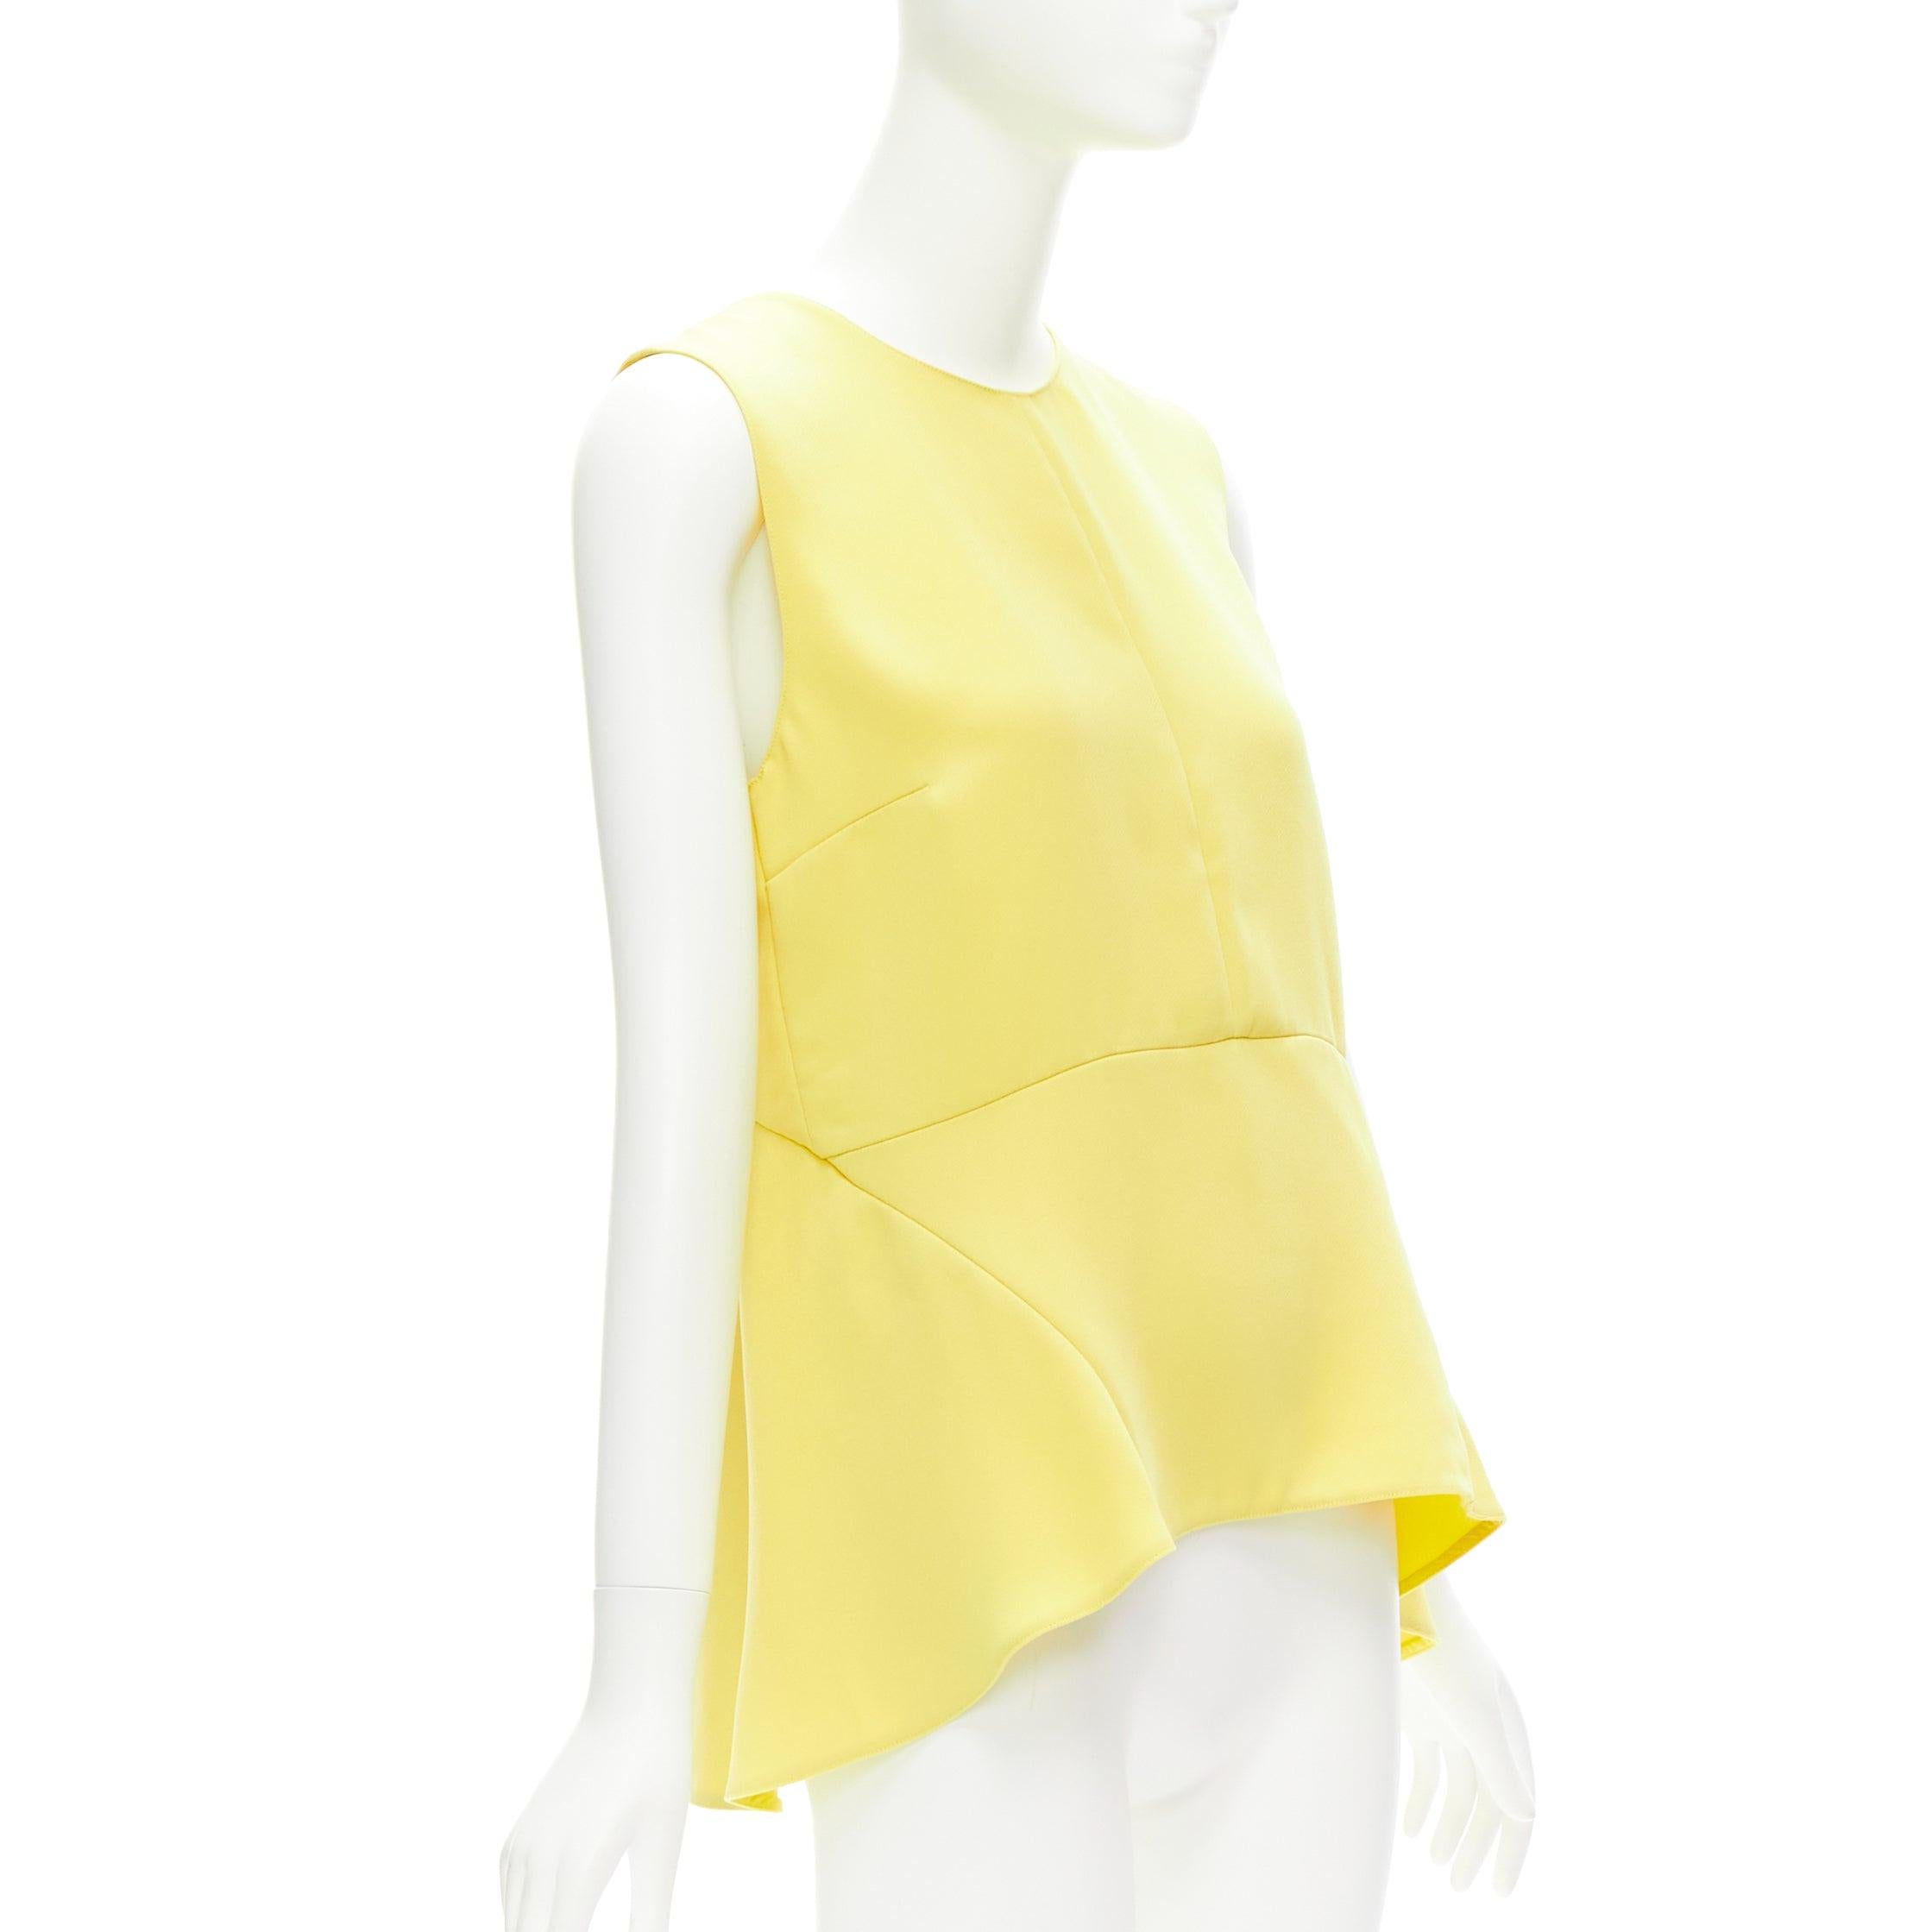 MARNI canary yellow darted high low peplum sleeveless top IT42 M
Reference: CELG/A00310
Brand: Marni
Material: Triacetate, Blend
Color: Yellow
Pattern: Solid
Closure: Zip
Lining: Yellow Fabric
Extra Details: Back zip. Back darts.
Made in: